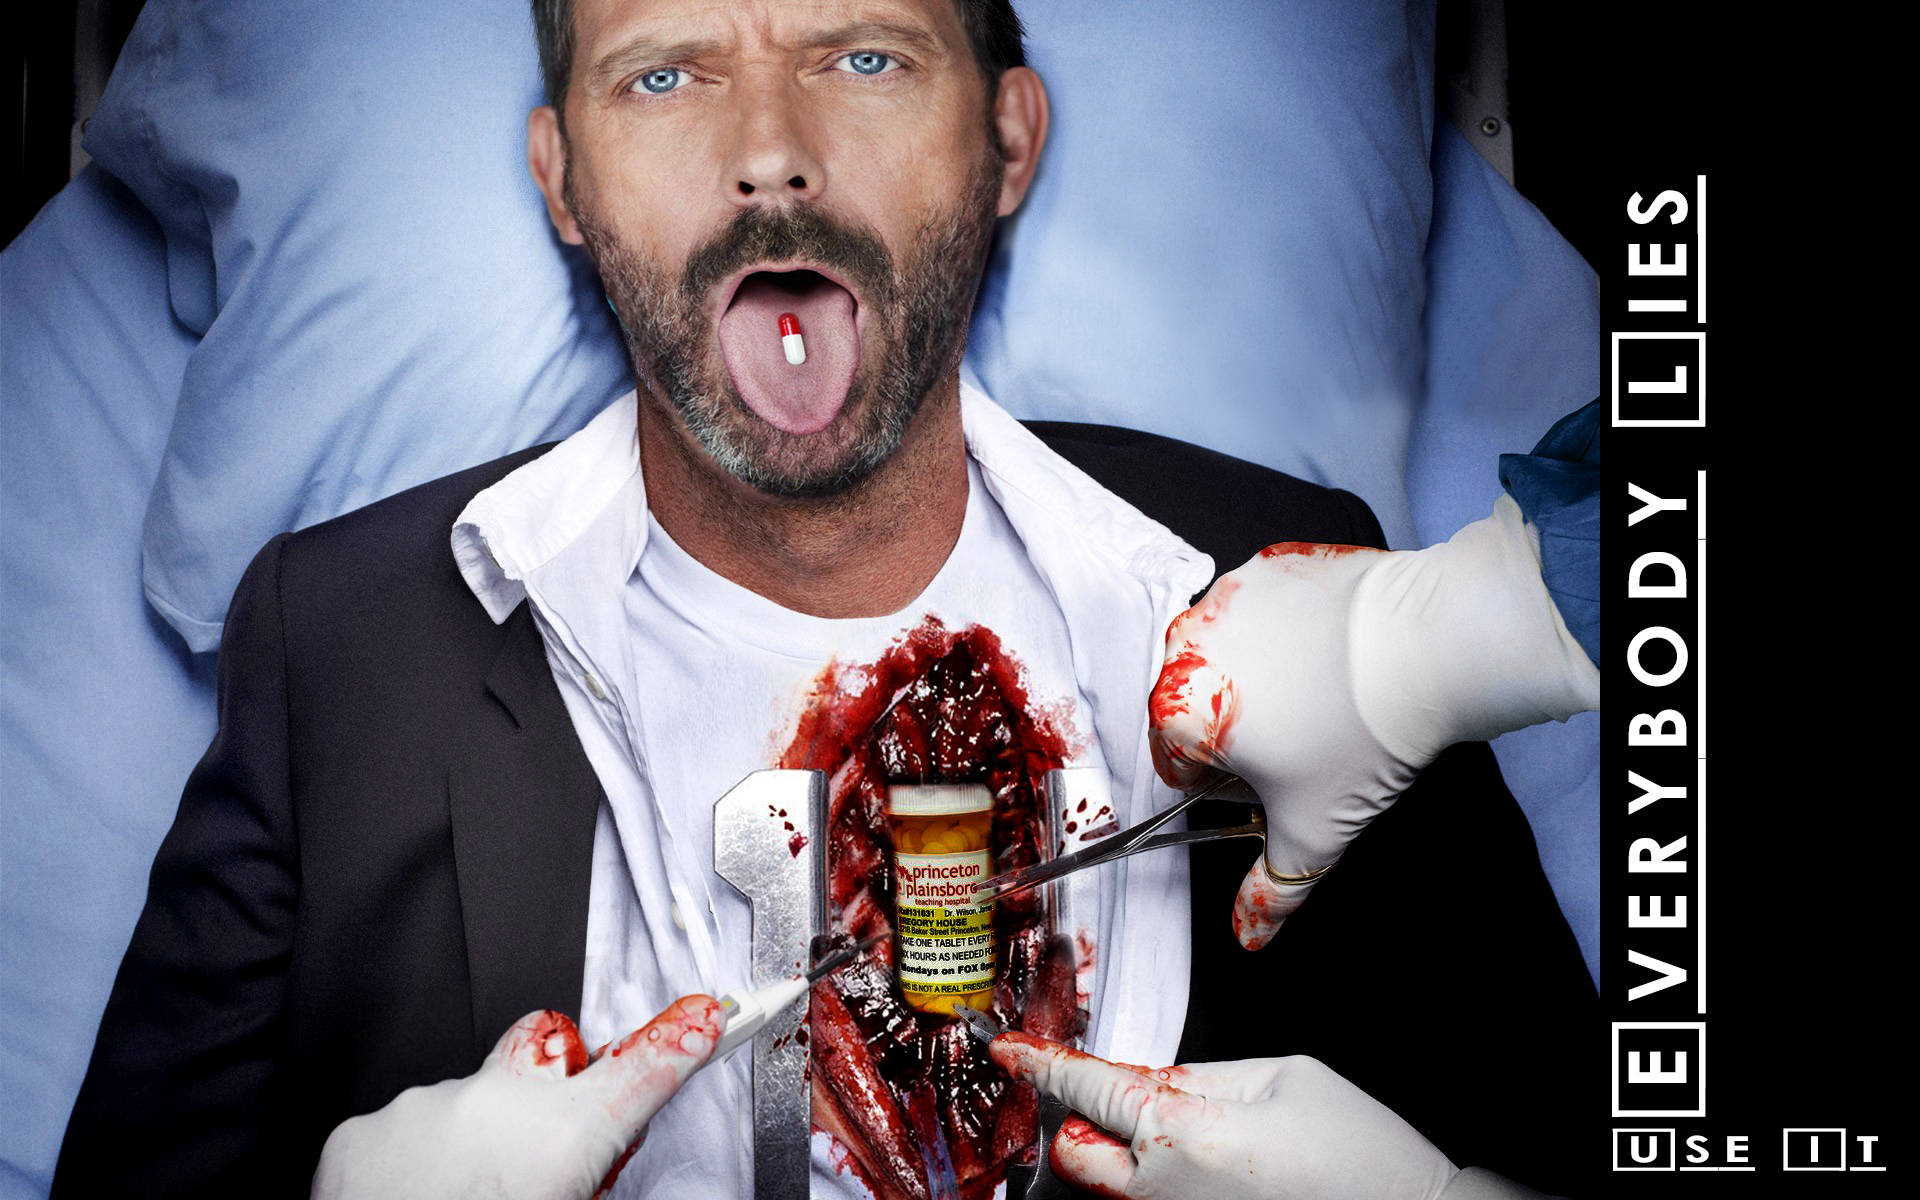 House Md Bloody Wallpaper